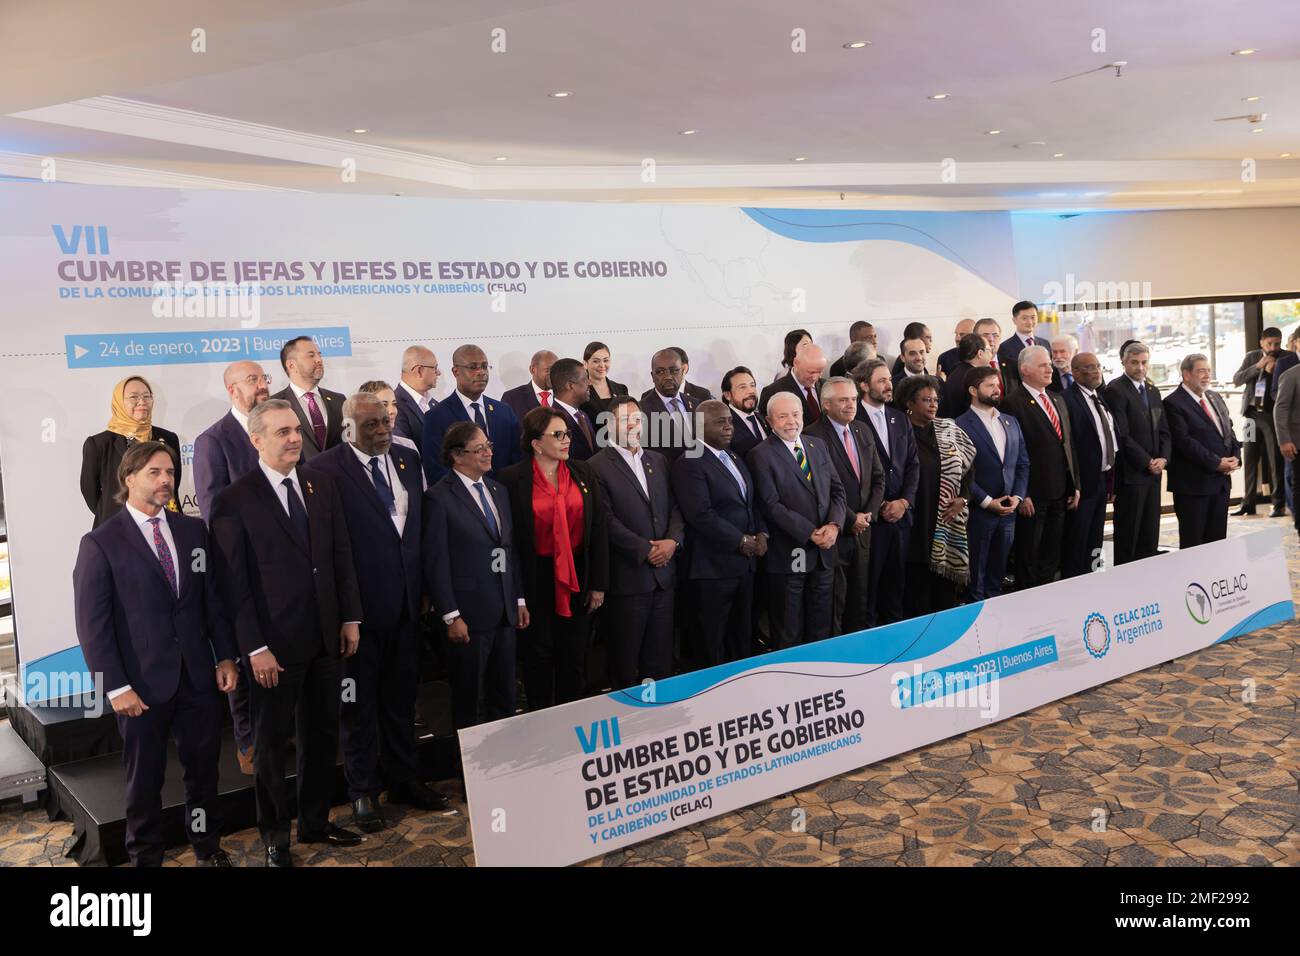 Buenos Aires, Argentina, 24th January 2023. The Summit of Heads of State and Government of the Community of Latin American and Caribbean States (CELAC, in its Spanish acronym) was held. (Credit: Esteban Osorio/Alamy Live News) Stock Photo